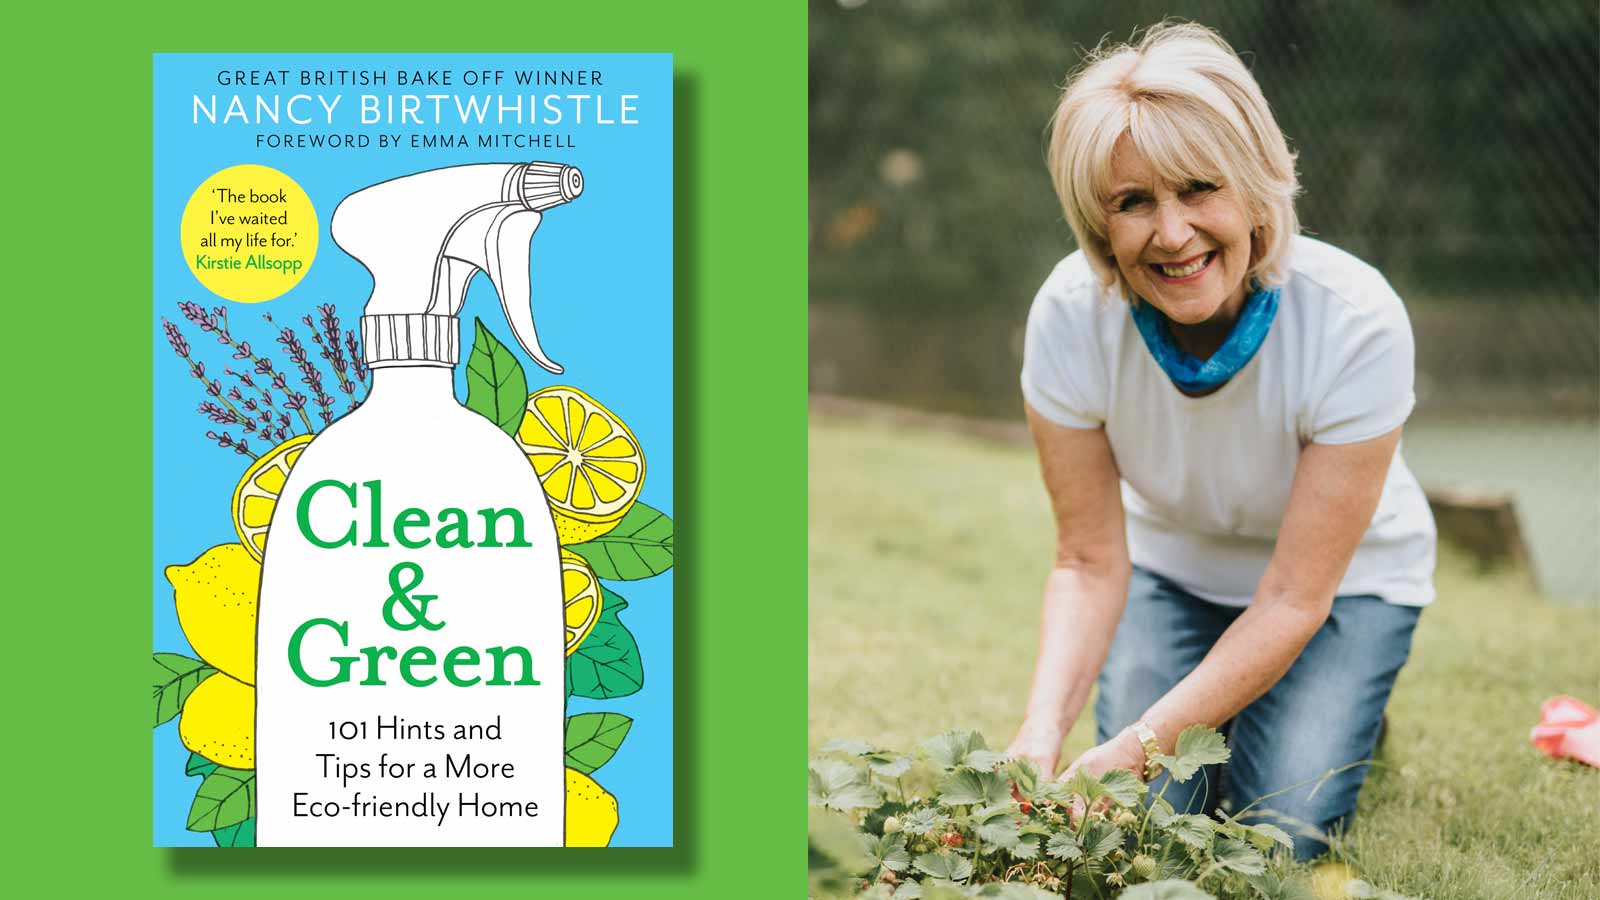 Clean & Green book cover and Nancy Birtwhistle gardening